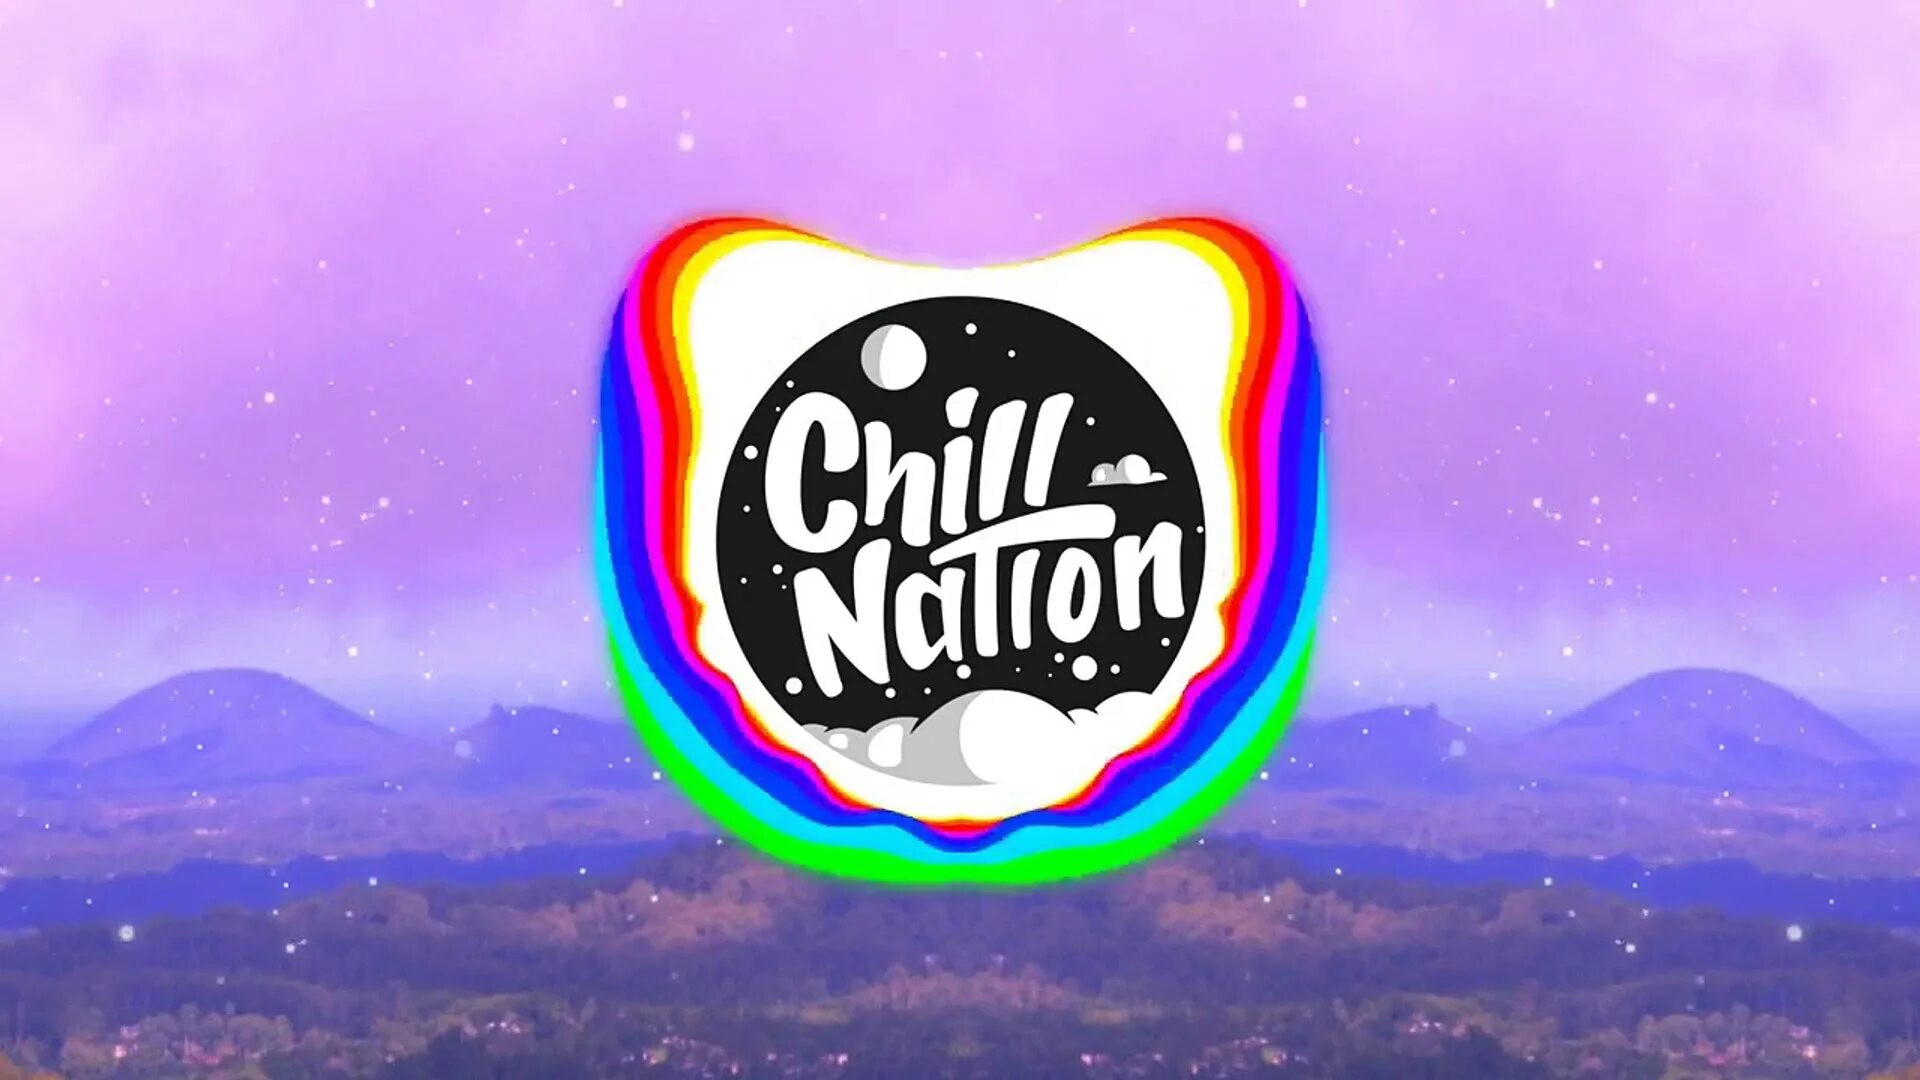 Remix mp 3. Chill Nation. Chill Nation logo. Chill Nation Wallpapers. The Chill.